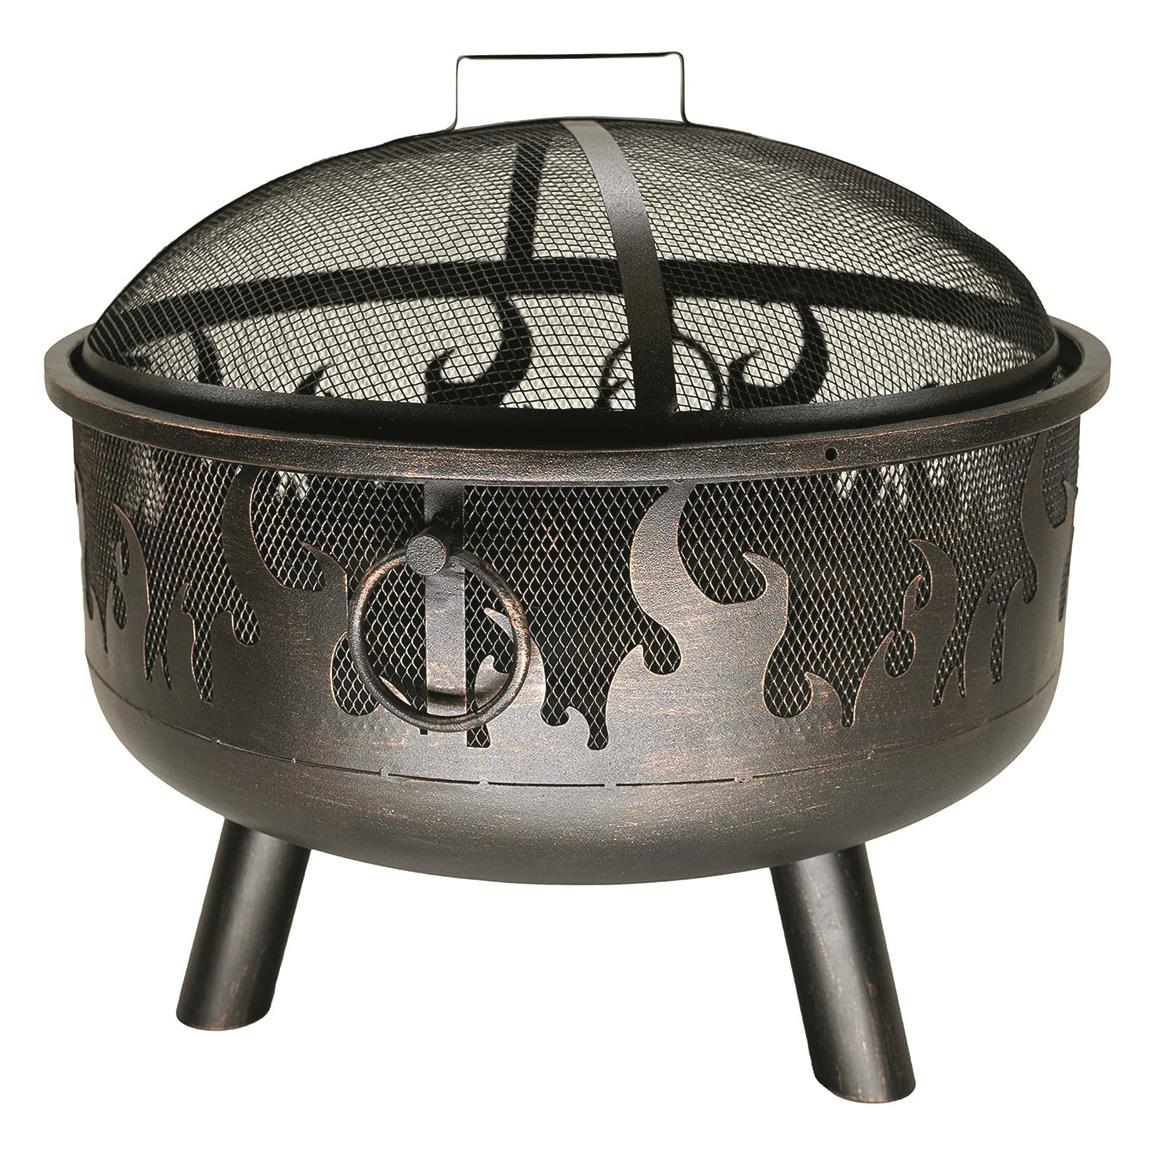 Endless Summer 24" Fire Pit with Oil Rubbed Bronze & Flame Design